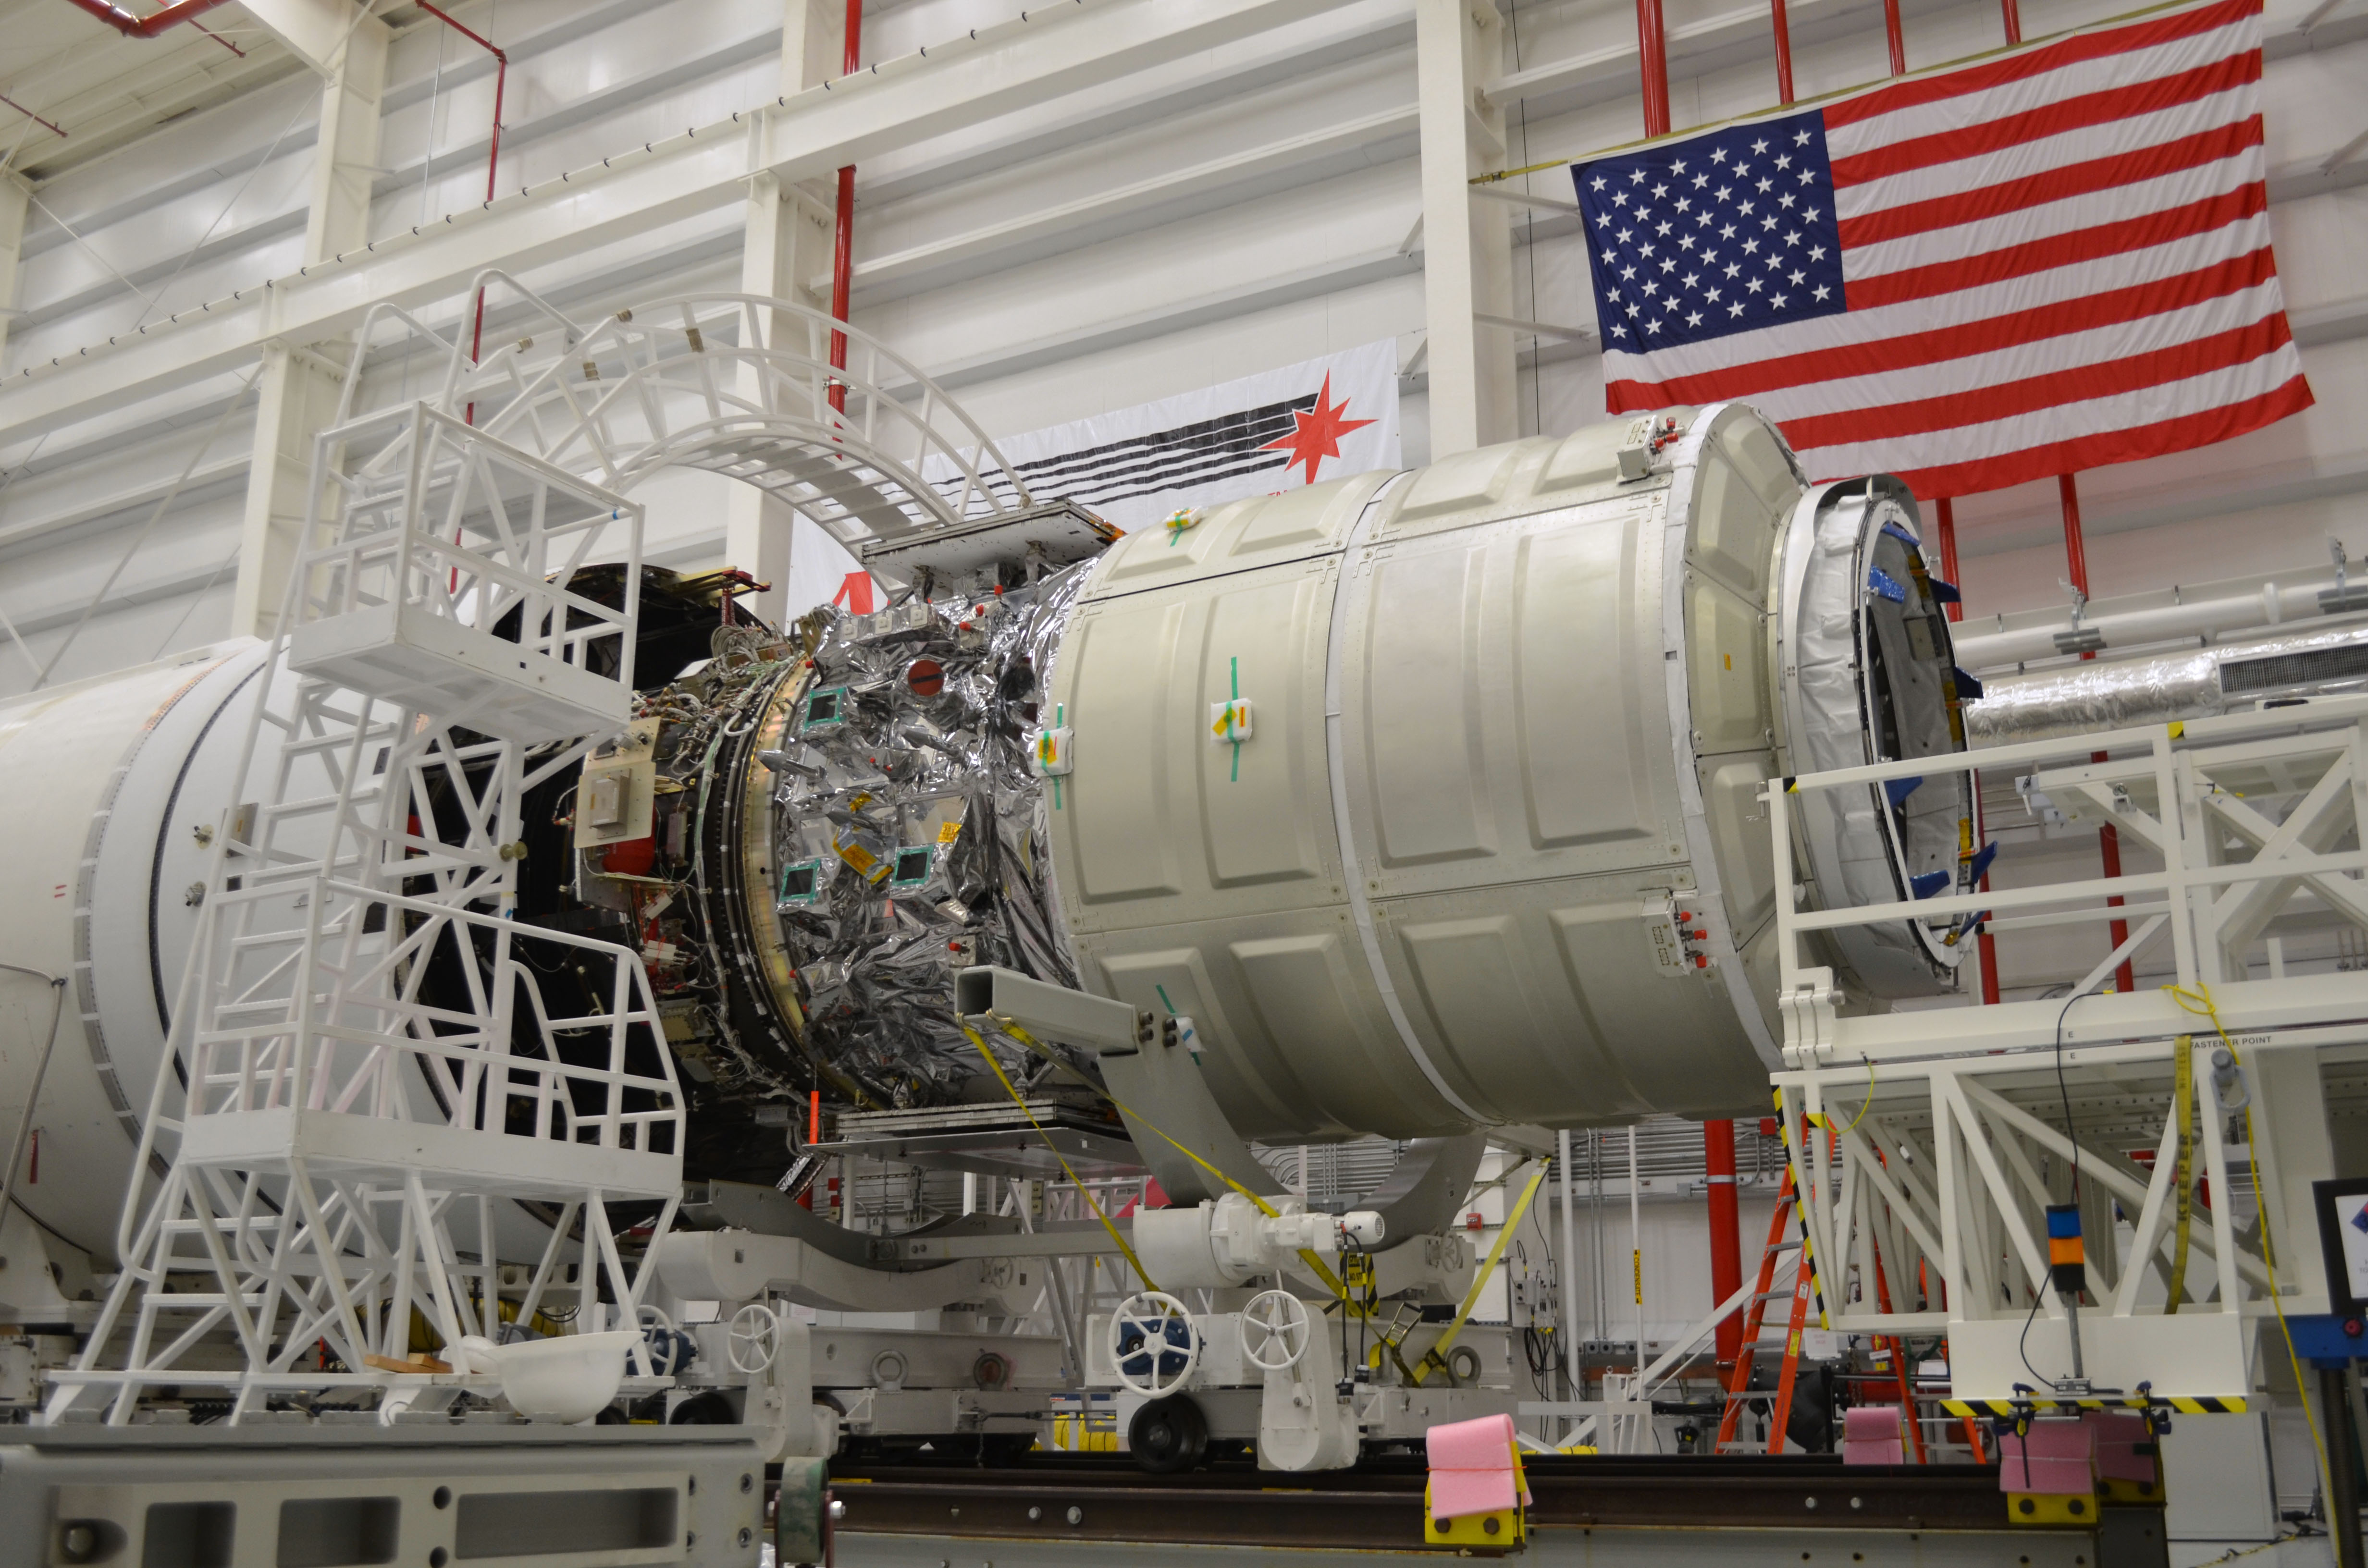 NASA Orbital image of Cygnus 1 spacecraft being integrated into Antares rocket posted on AmericaSpace